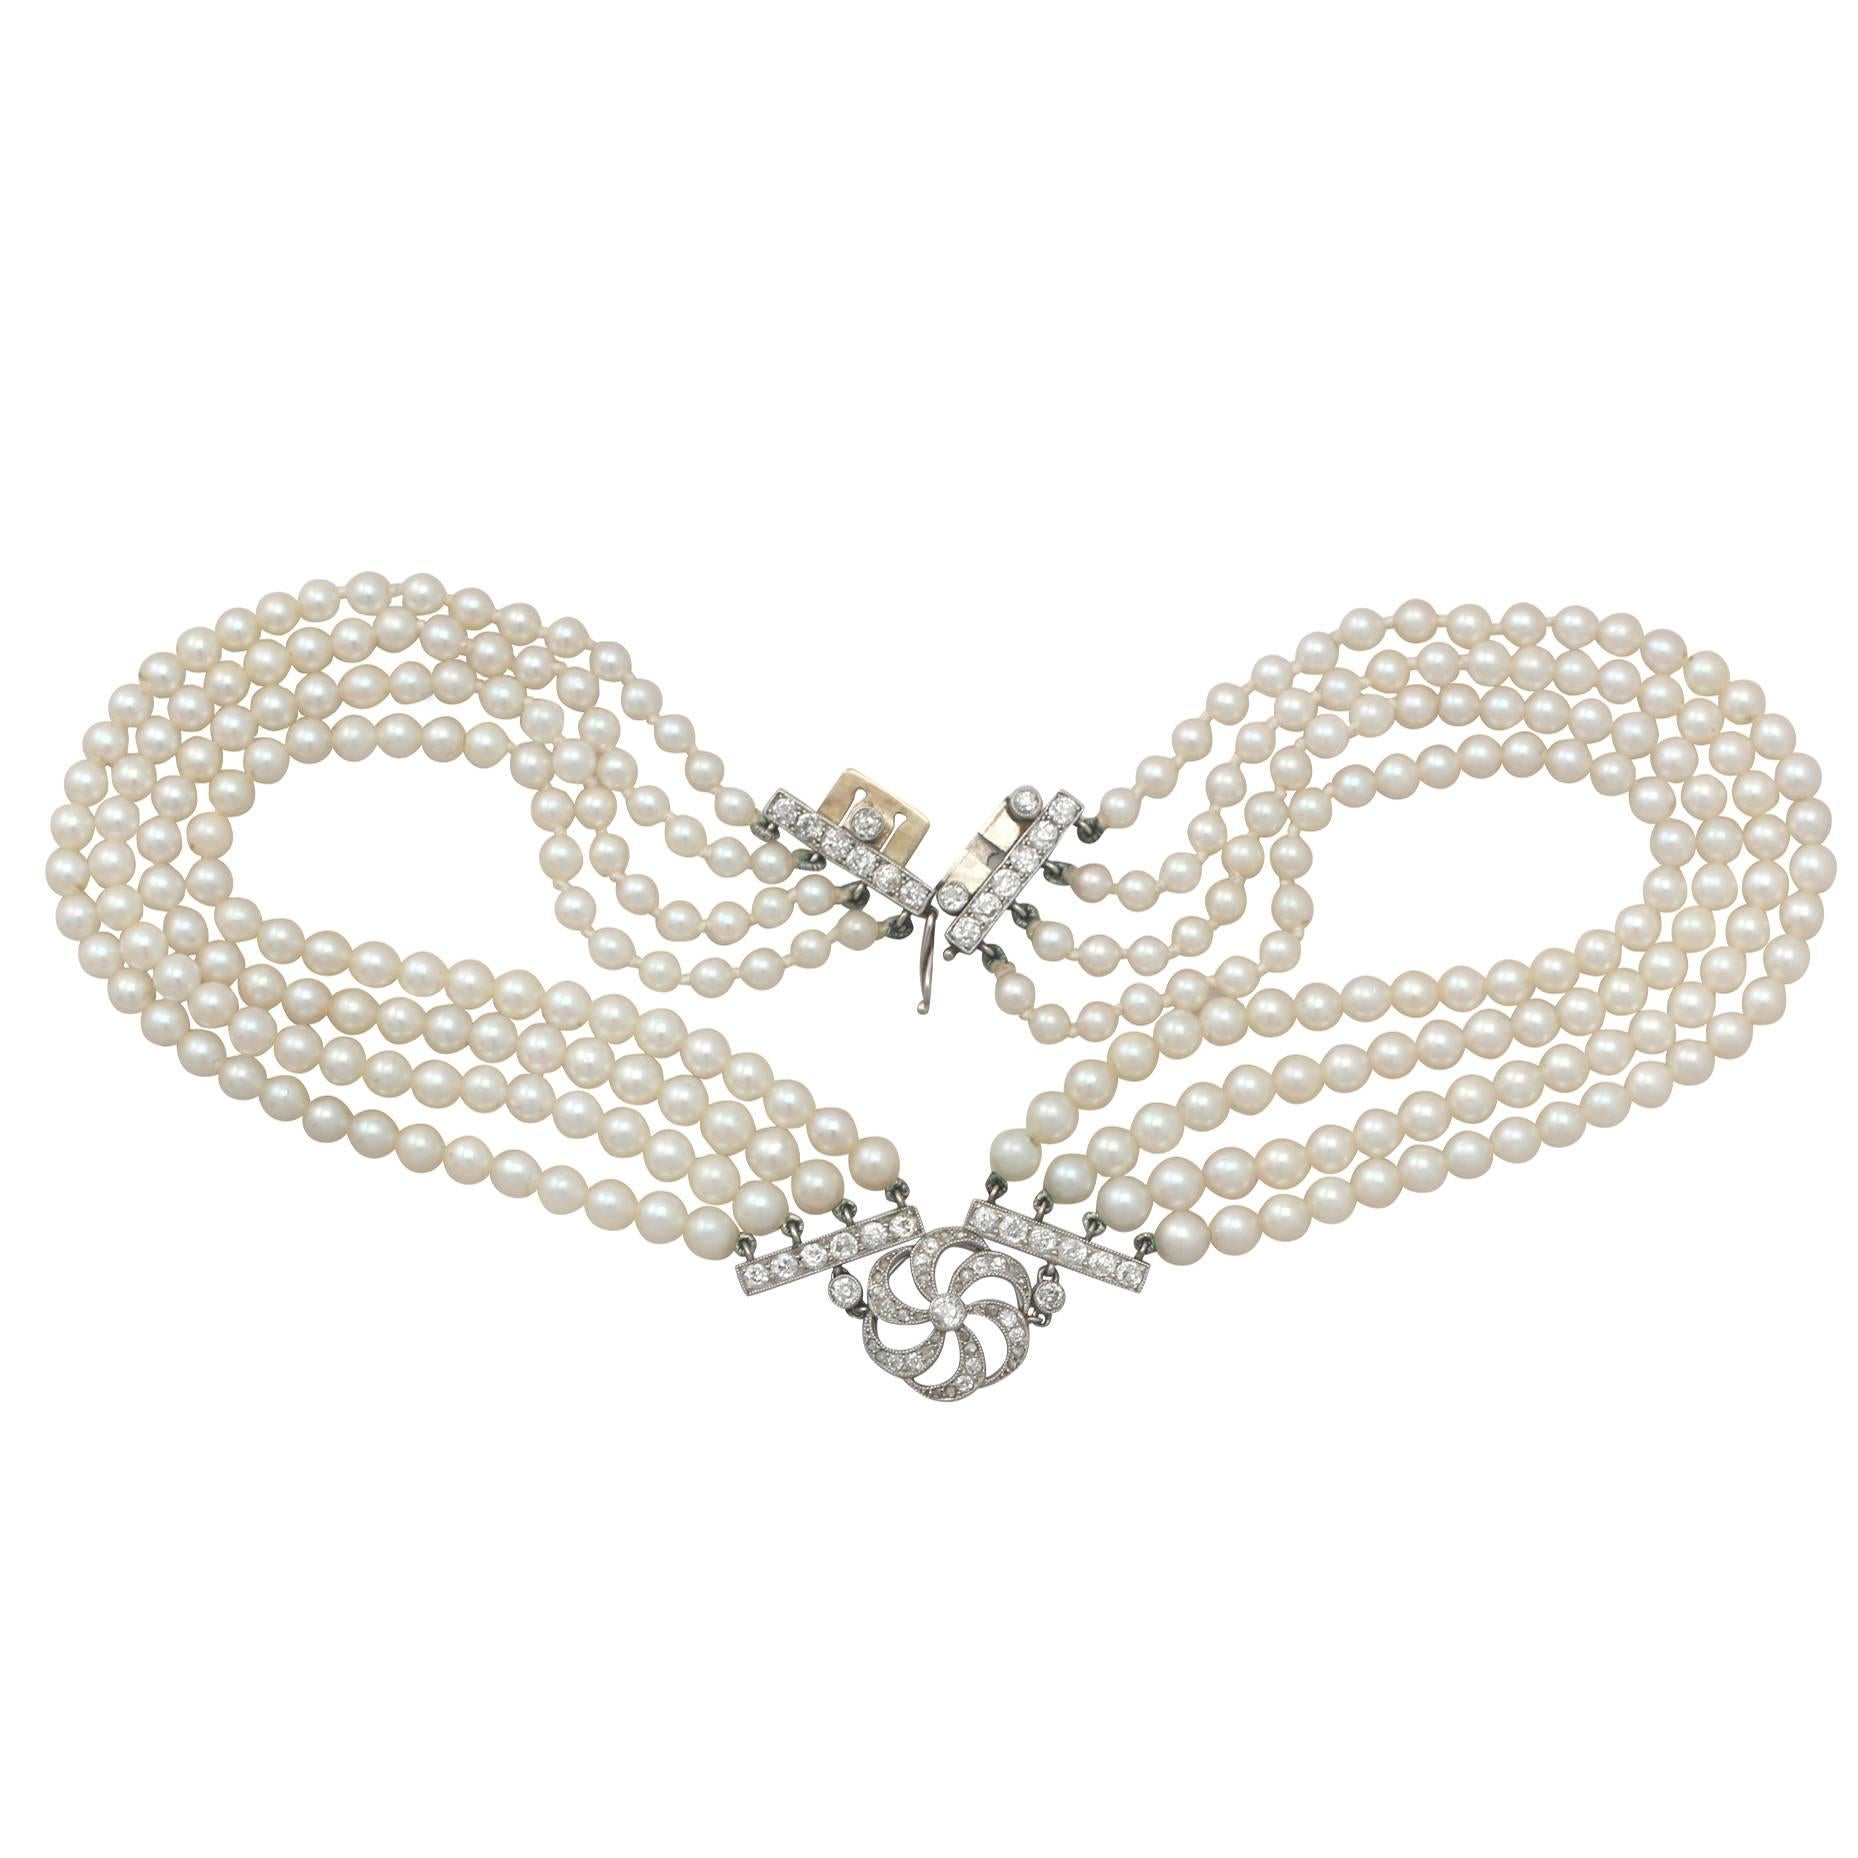 A stunning, fine and impressive four strand pearl choker with a 1.32 carat diamond set feature and platinum clasp; part of our diverse necklace and pendant collection

This stunning, fine and impressive pearl and diamond choker displays a single